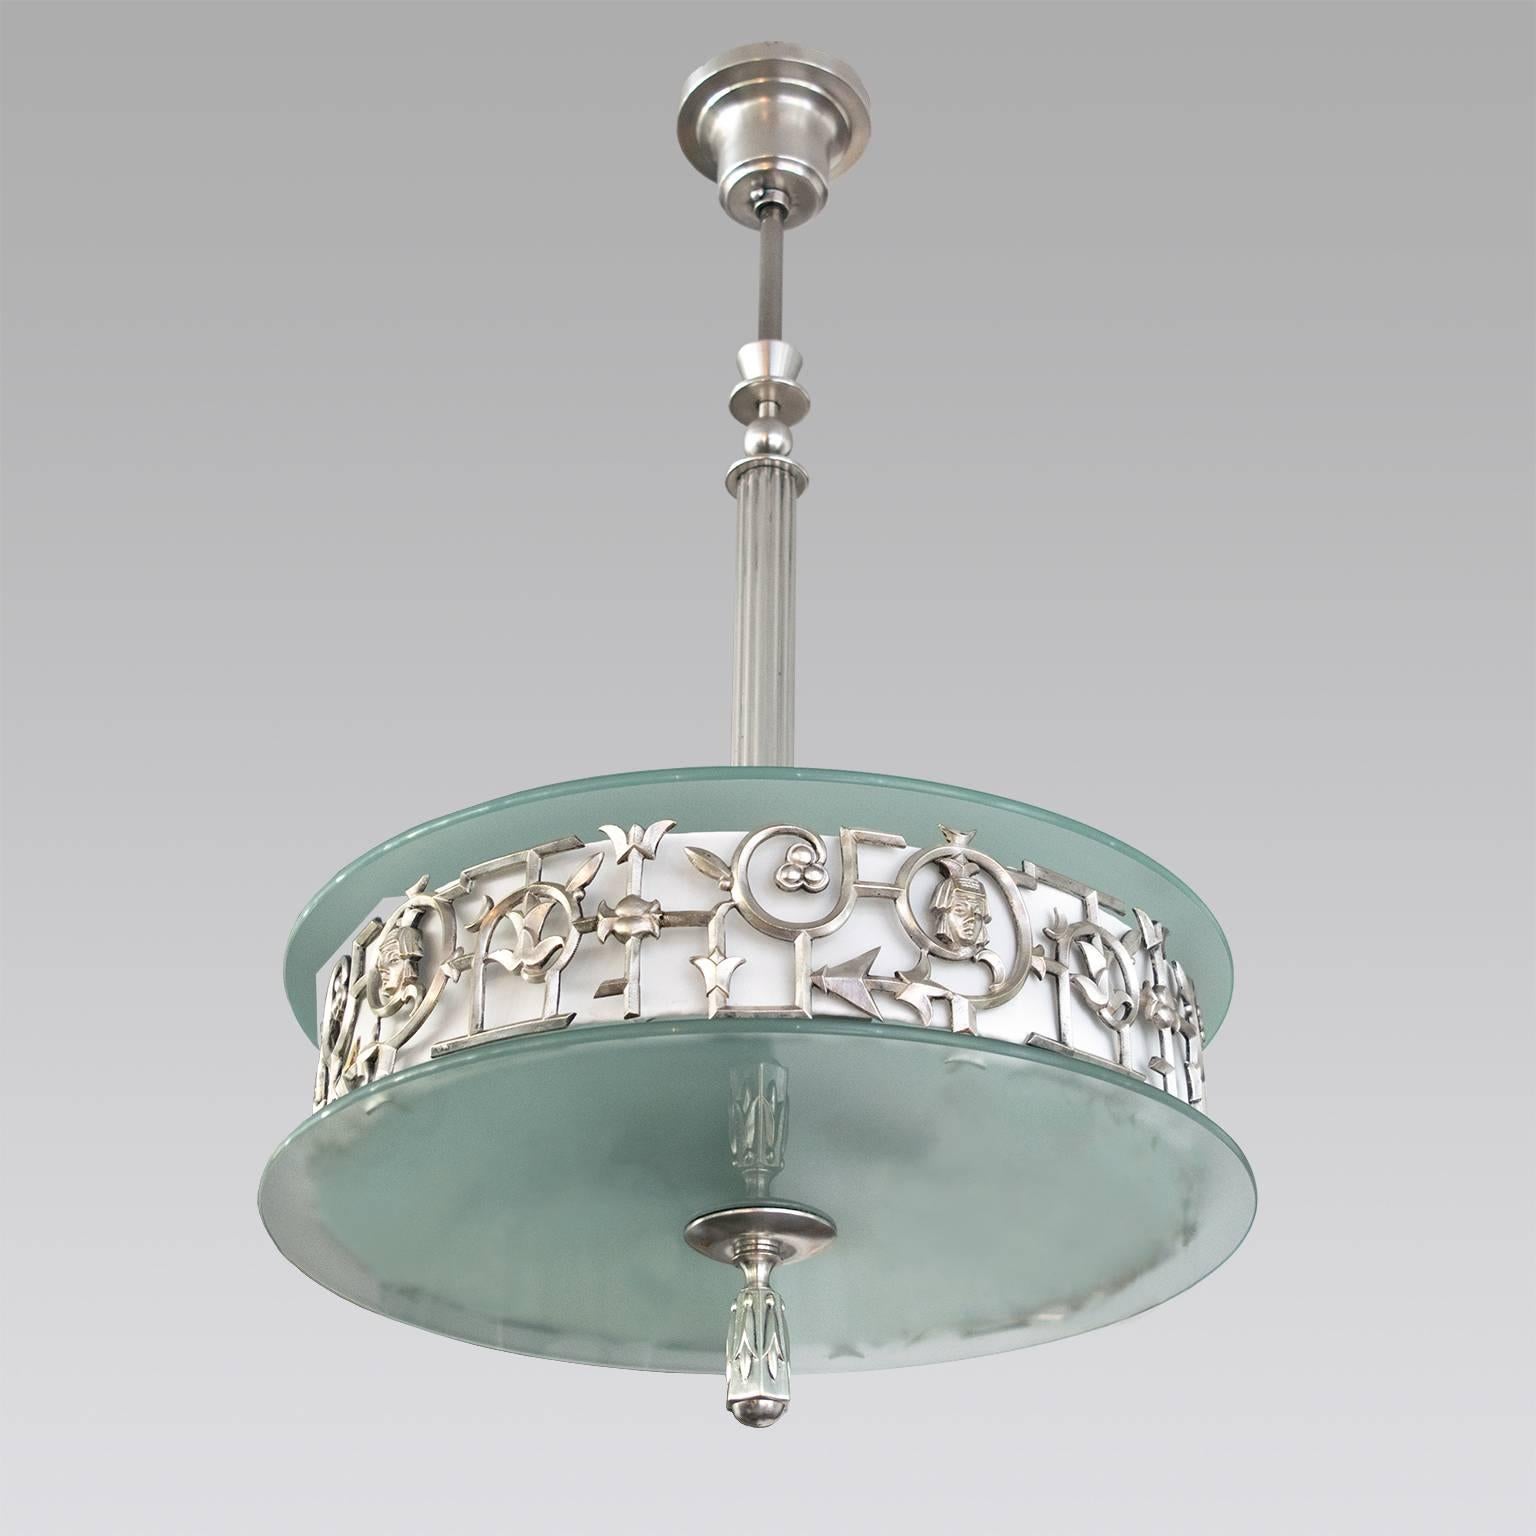 An elegant Scandinavian Modern, Swedish Art Deco (Swedish Grace) pendant with silver plate grillwork, stem, canopy and finial. The grillwork has stylized flowers and vines and face with an Egyptian headdress. Two sand-blasted pieces of glass diffuse